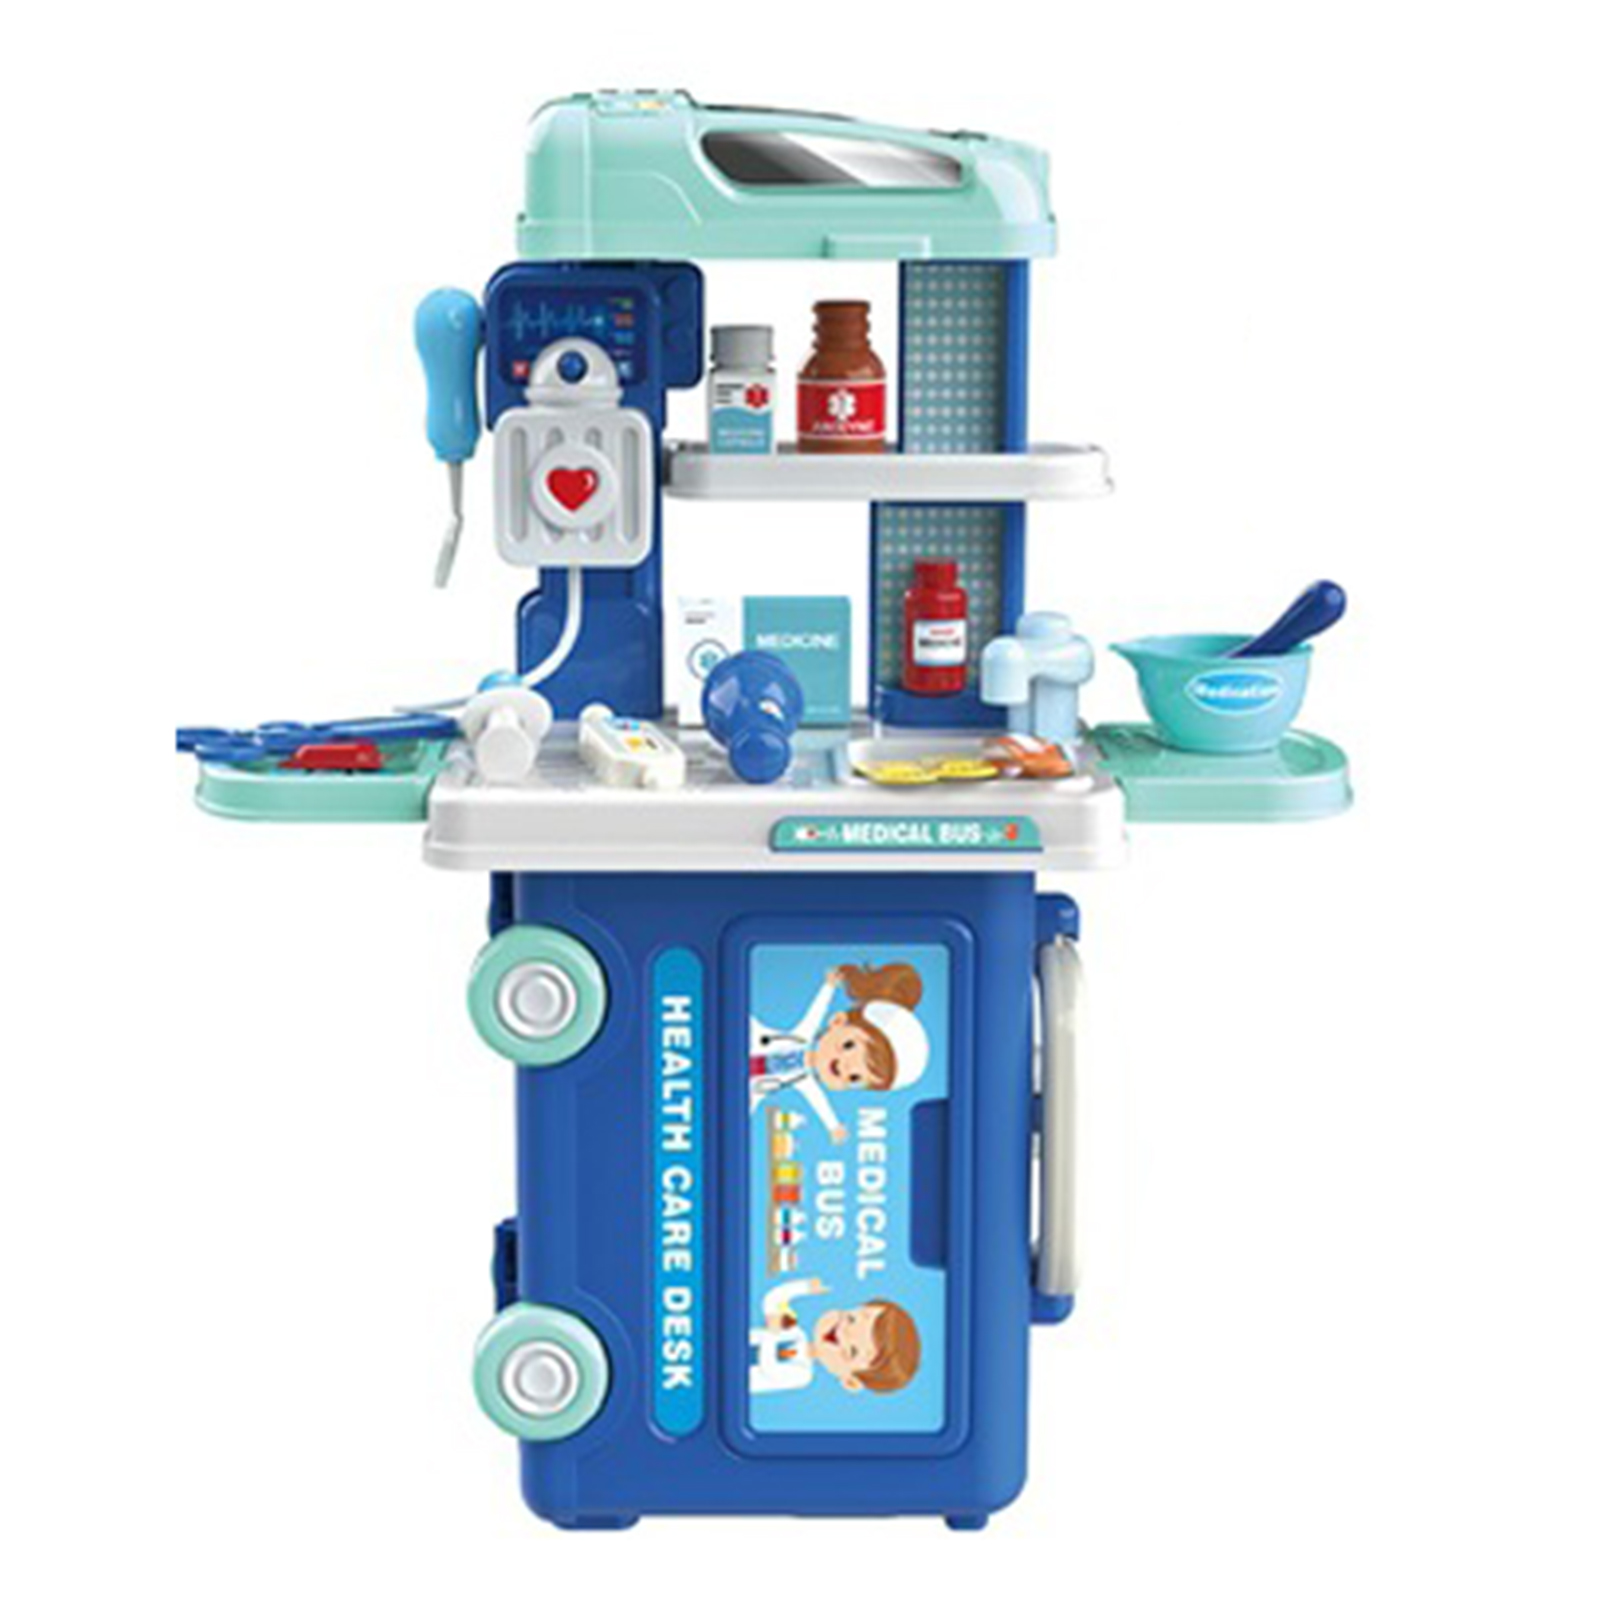 3-in-1 Children Bus Pretend Play Playset Simulation Doctor Kitchen Supermarket Makeup Kit Educational Toy For Kids Xmas Gifts